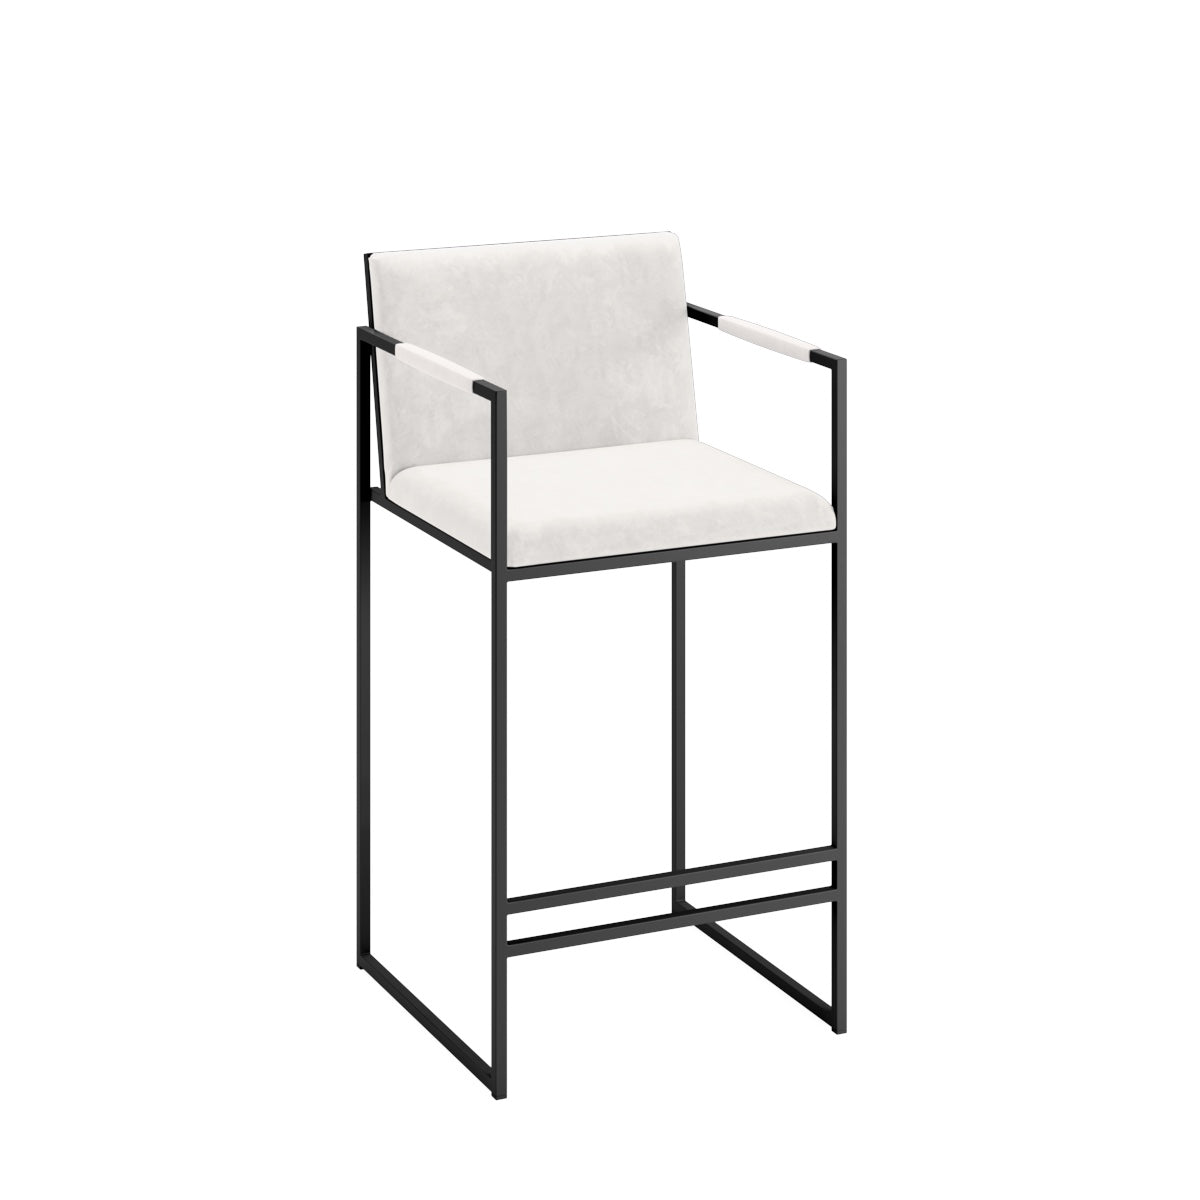 HAND CRAFTED SOHO METAL FRAME WHITE SUEDE BAR STOOL